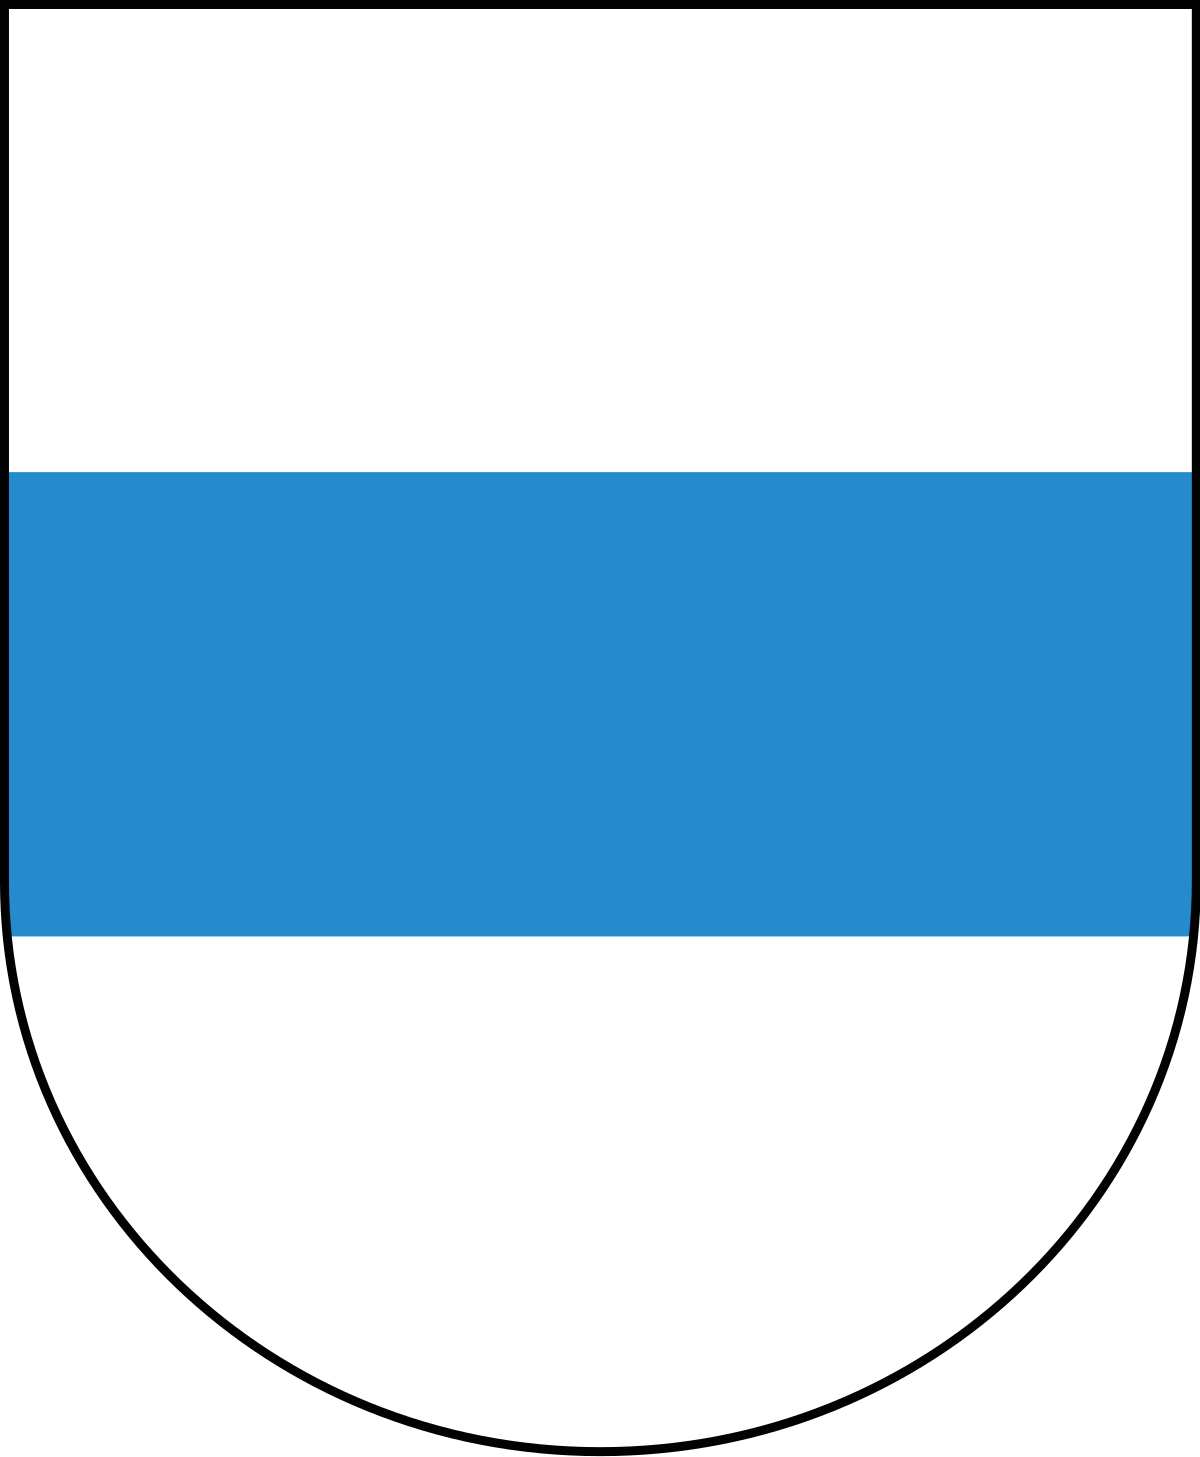 Coat of arms of the Canton of Zug